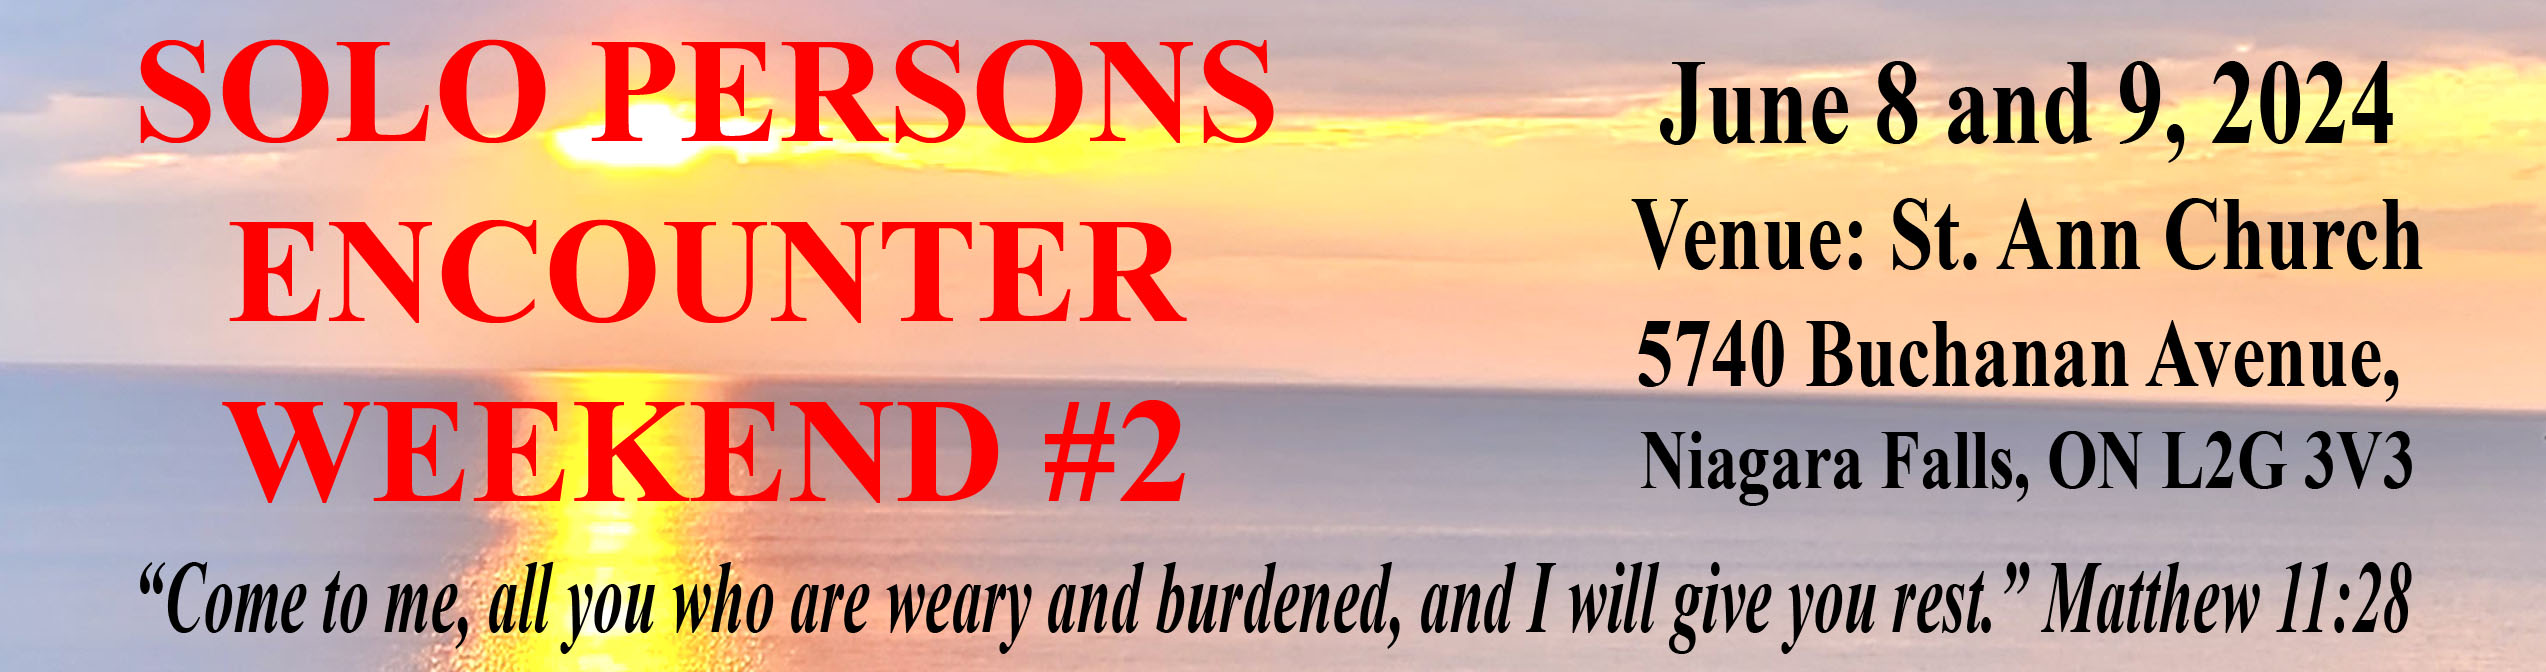 Solo Persons Encounter Weekend #2